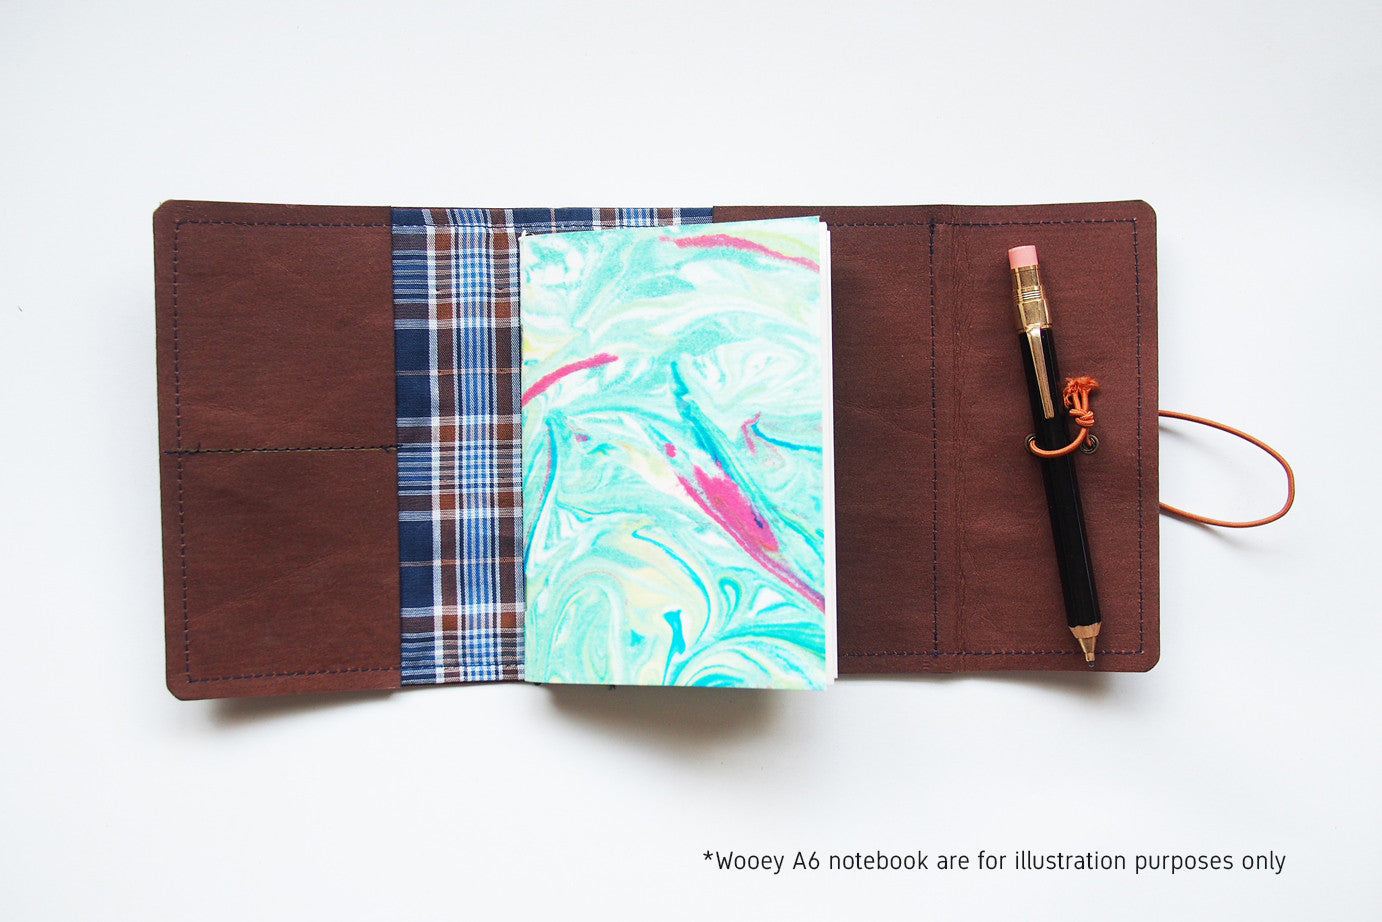 a6-traveler-s-notebook-cover-with-interior-lining-bnottee